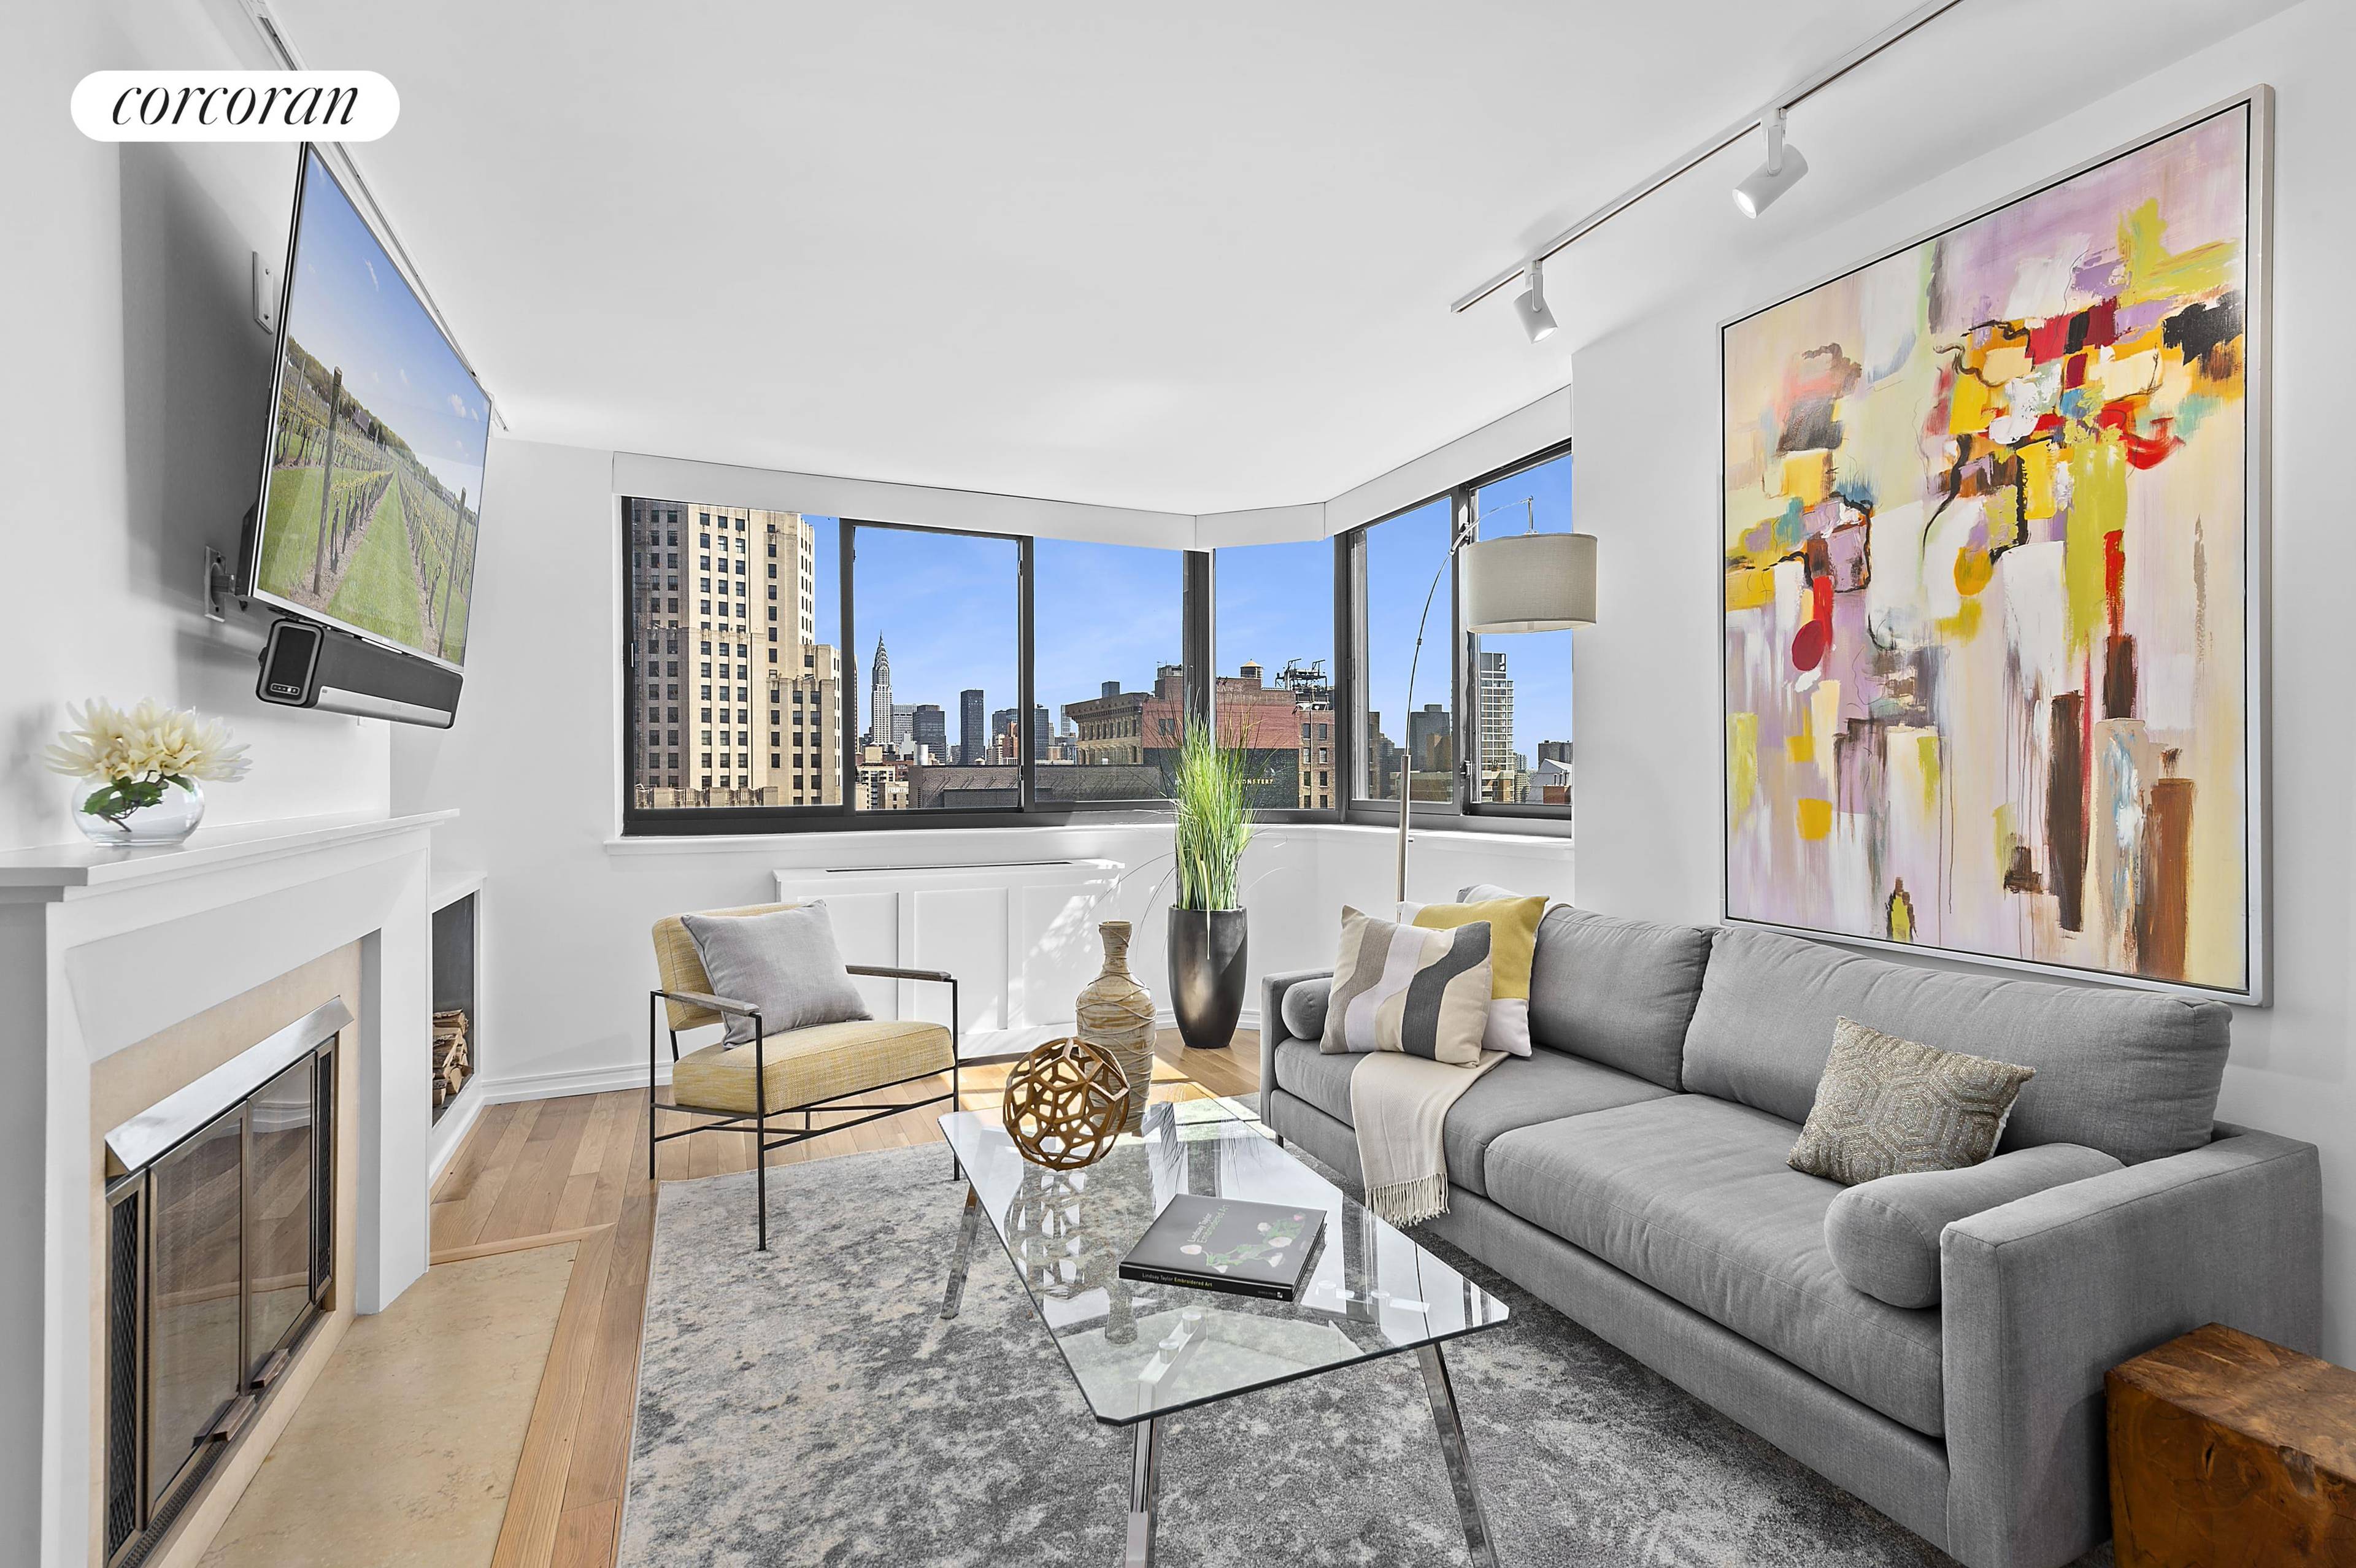 An amazing opportunity to own a renovated Condo at the highly sought after crossroads of Gramercy and Flatiron !